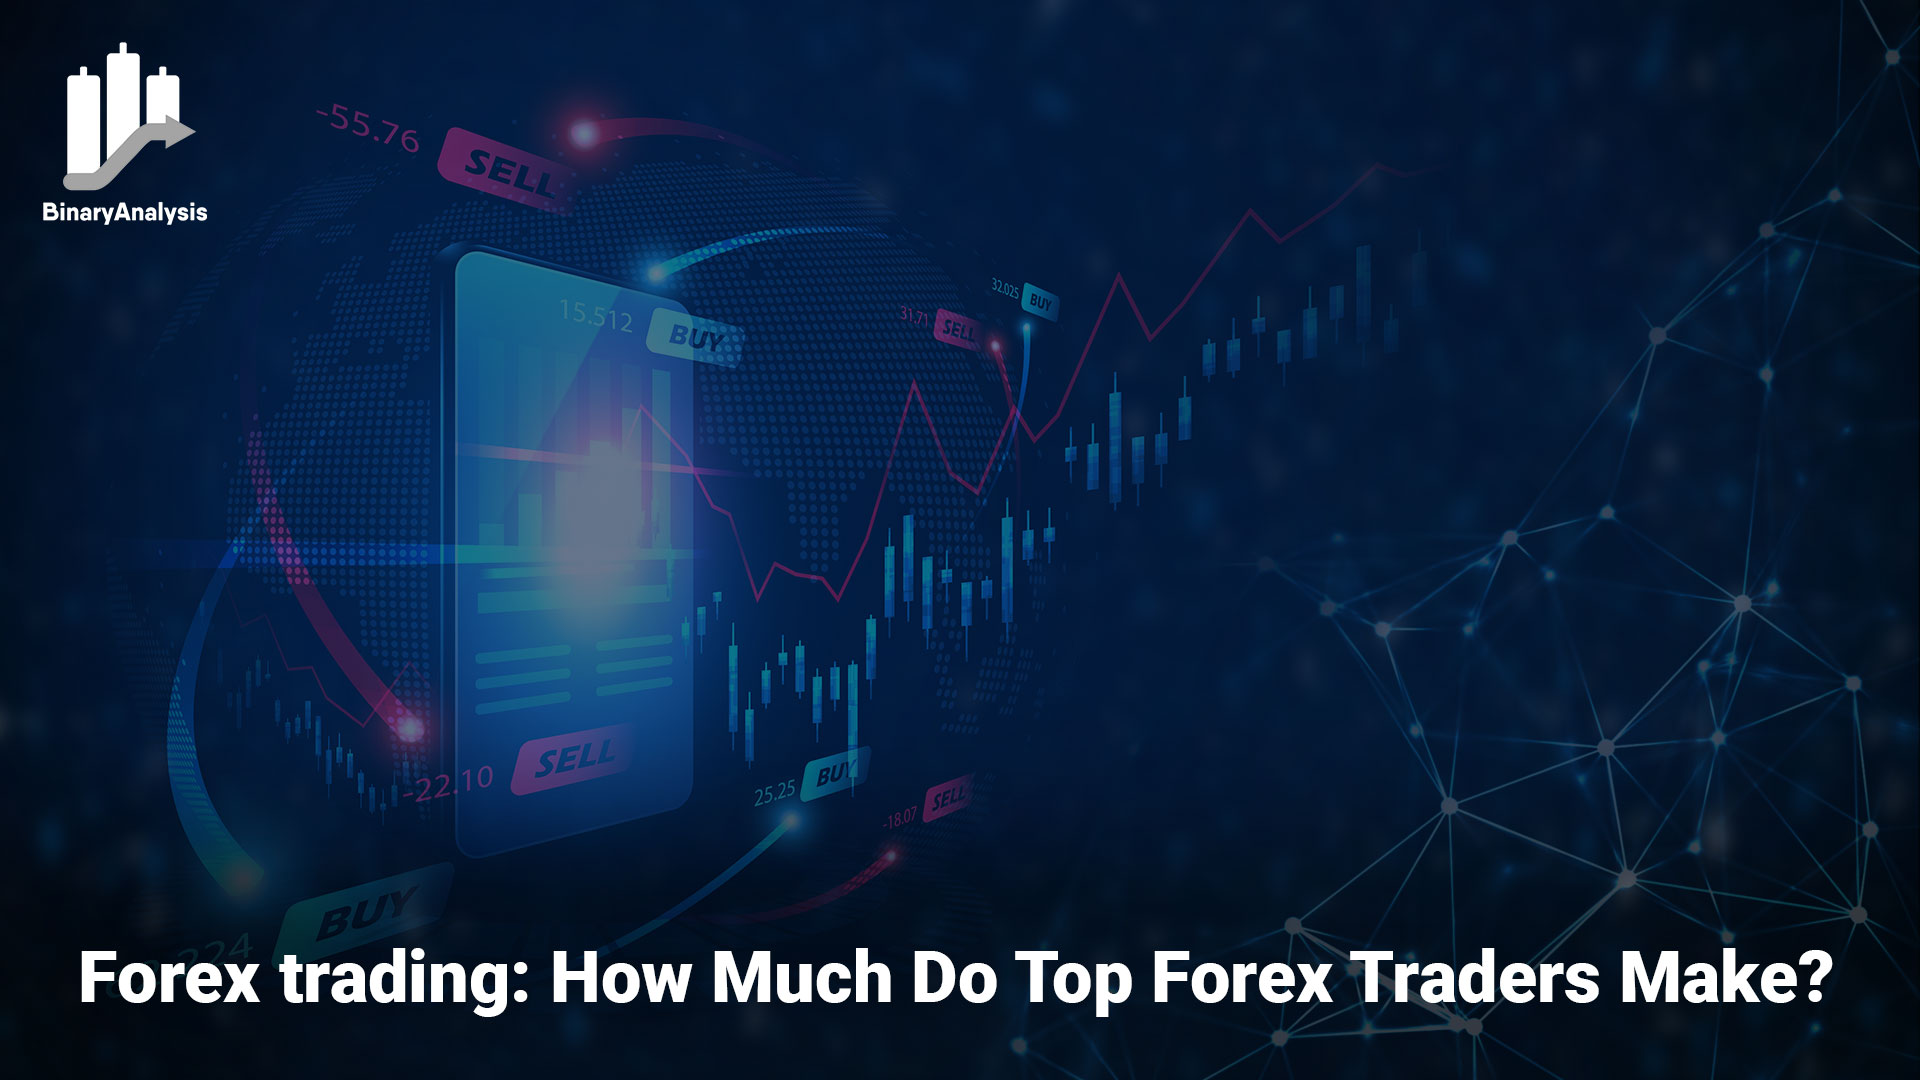   Forex trading: How Much Do Top Forex Traders Make?